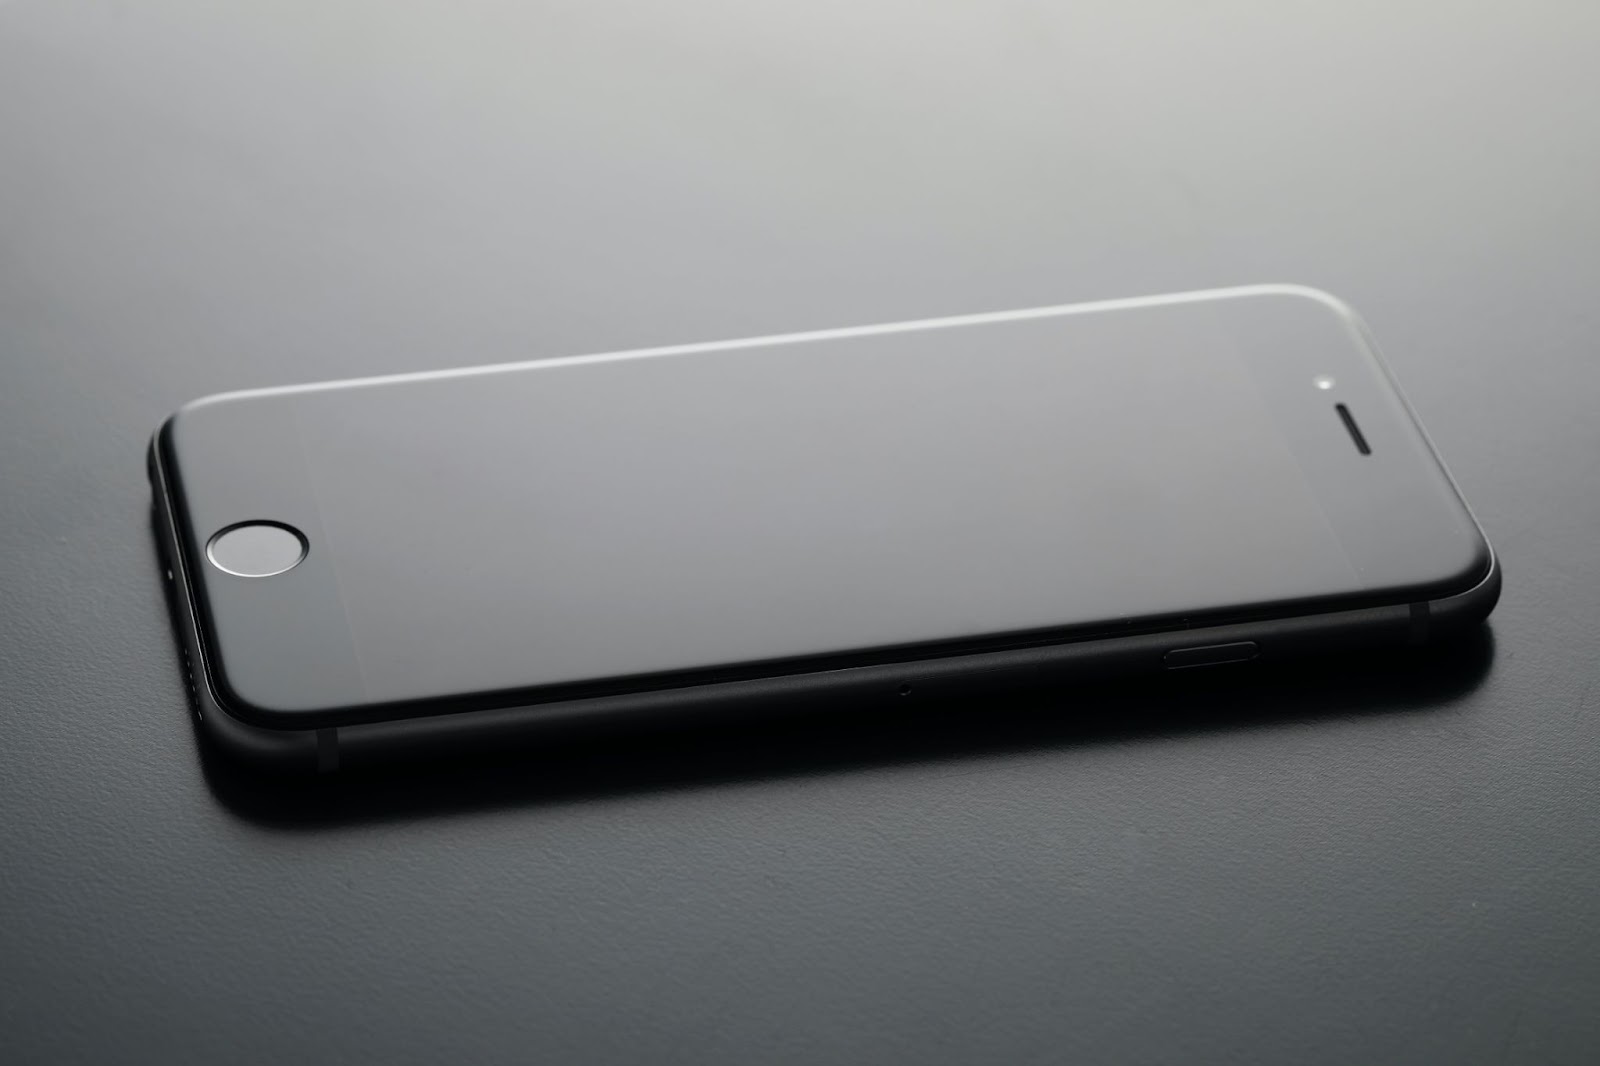 This image shows iPhone SE 2022 in black color and black background with slightly white light.